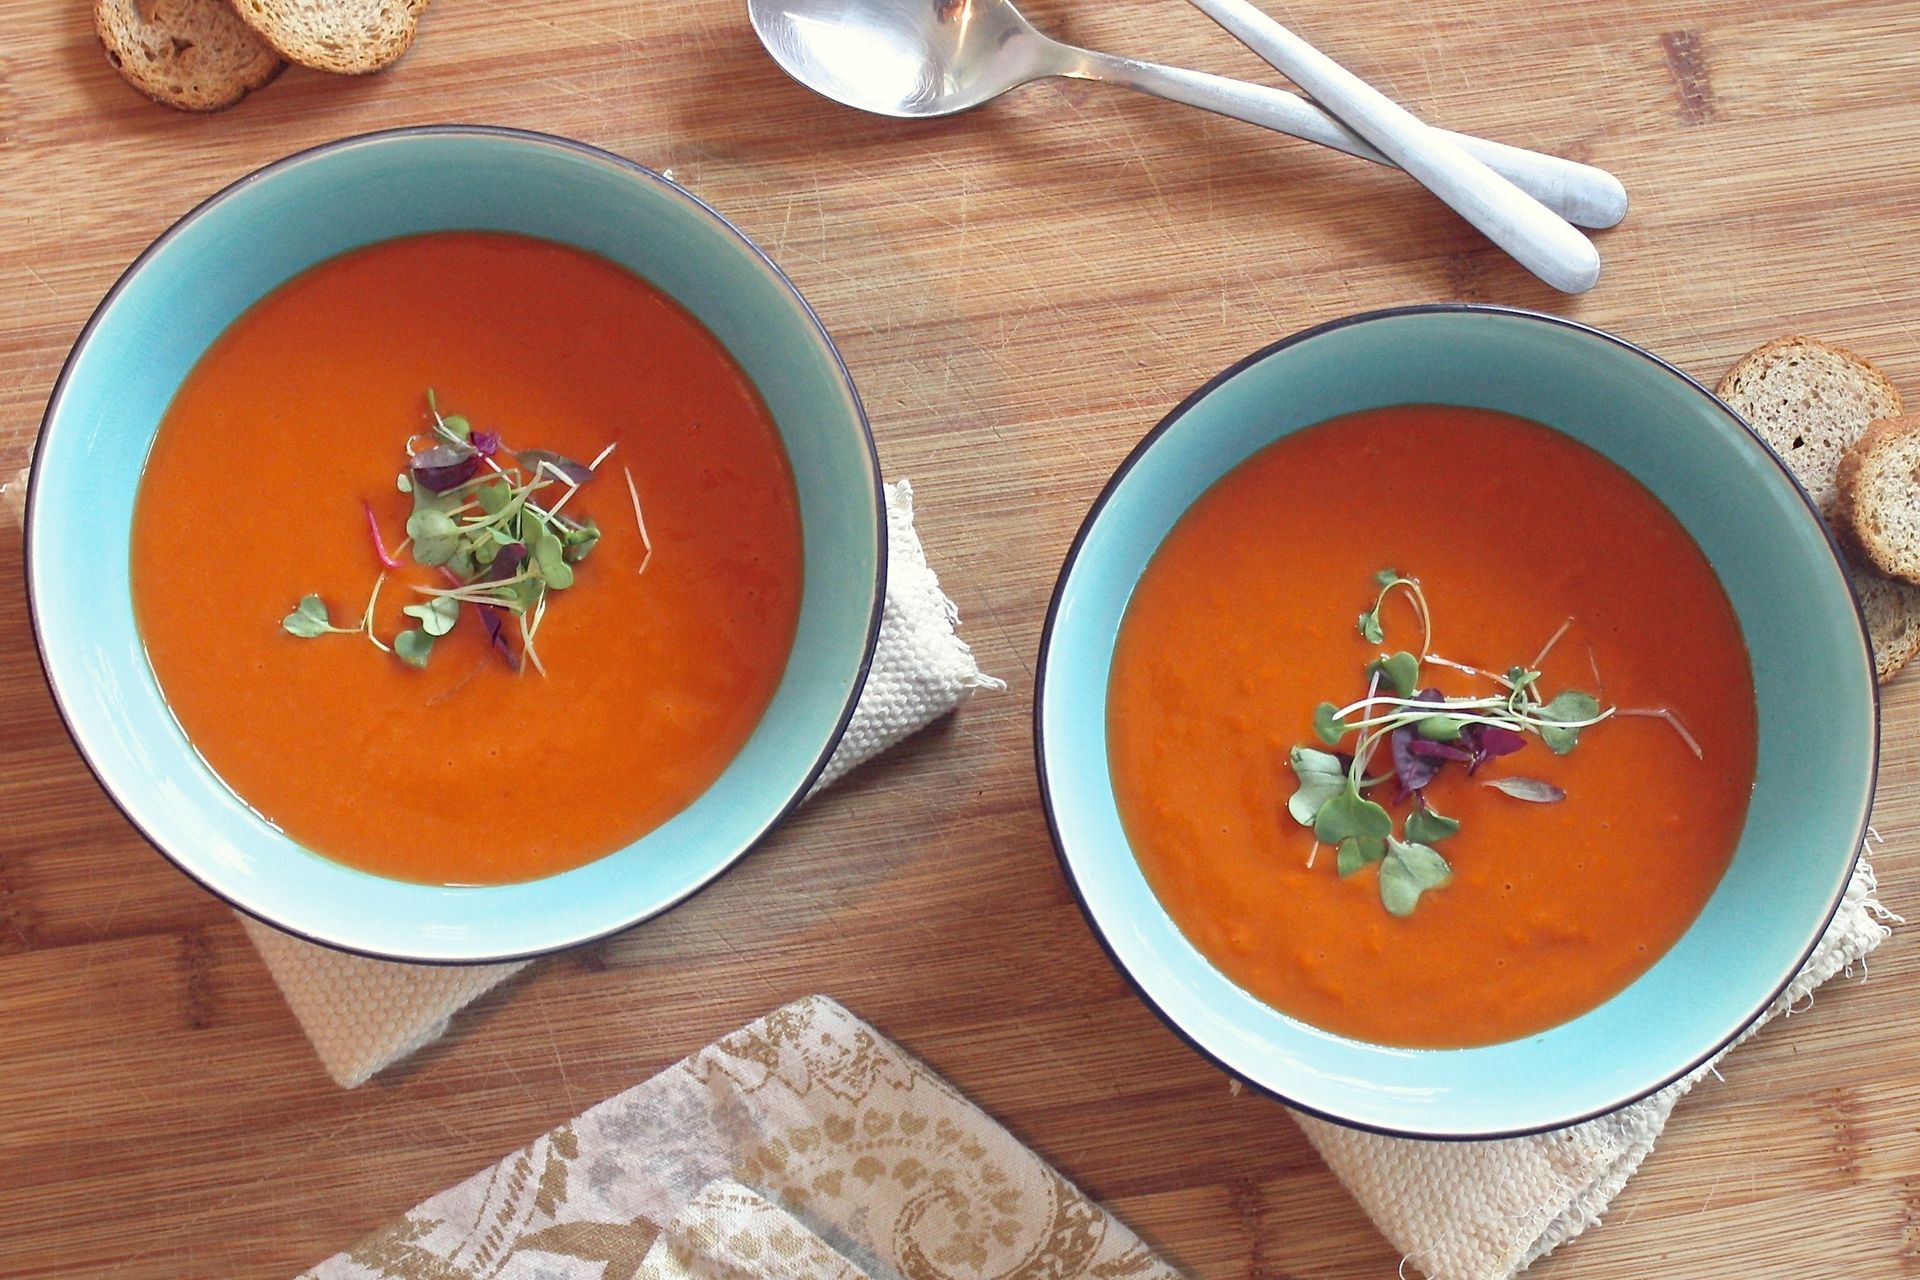 Two bowls of tomato soup side by side